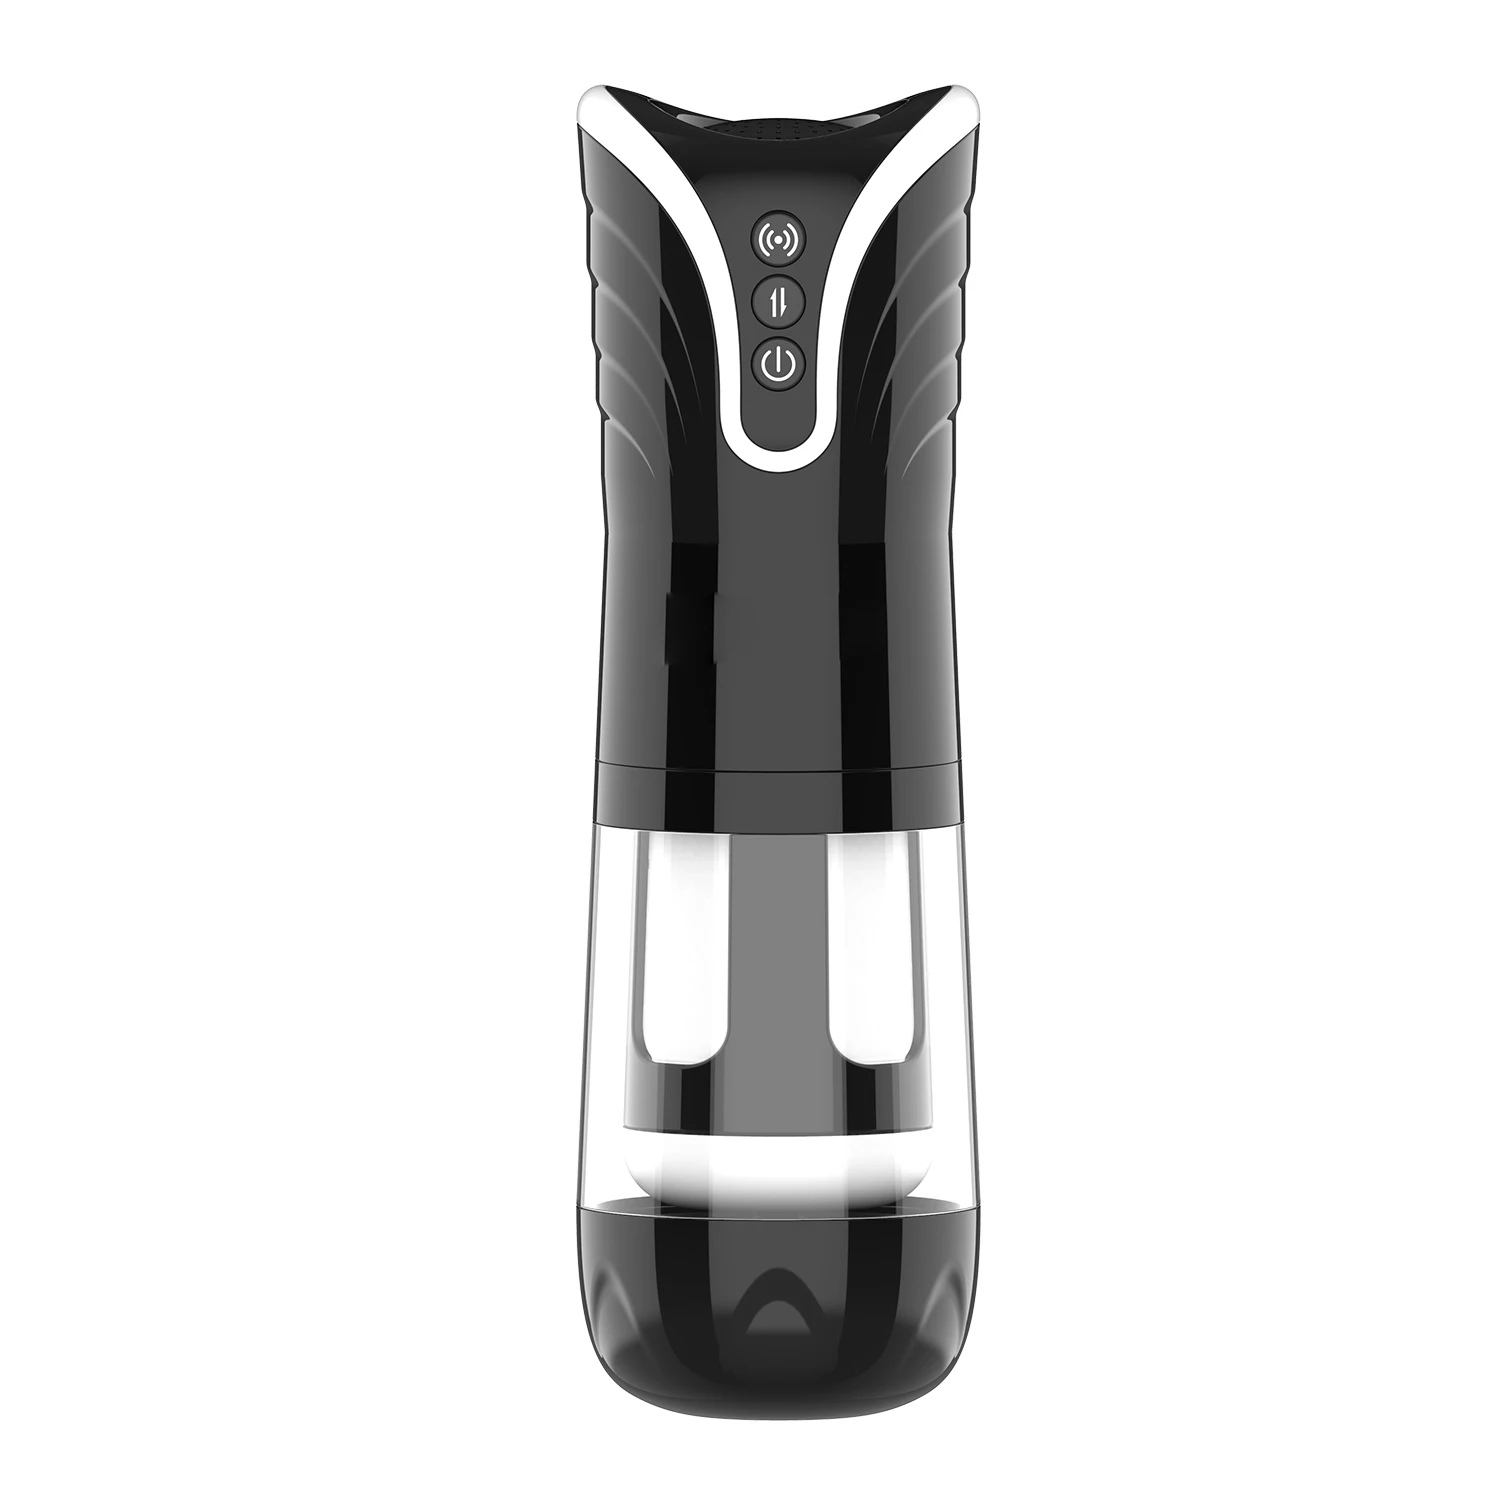 Wholesale Male Masturbation Aircraft Cup Homemade Sex Toys For Men Masturbation Penis With Video From m.alibaba image